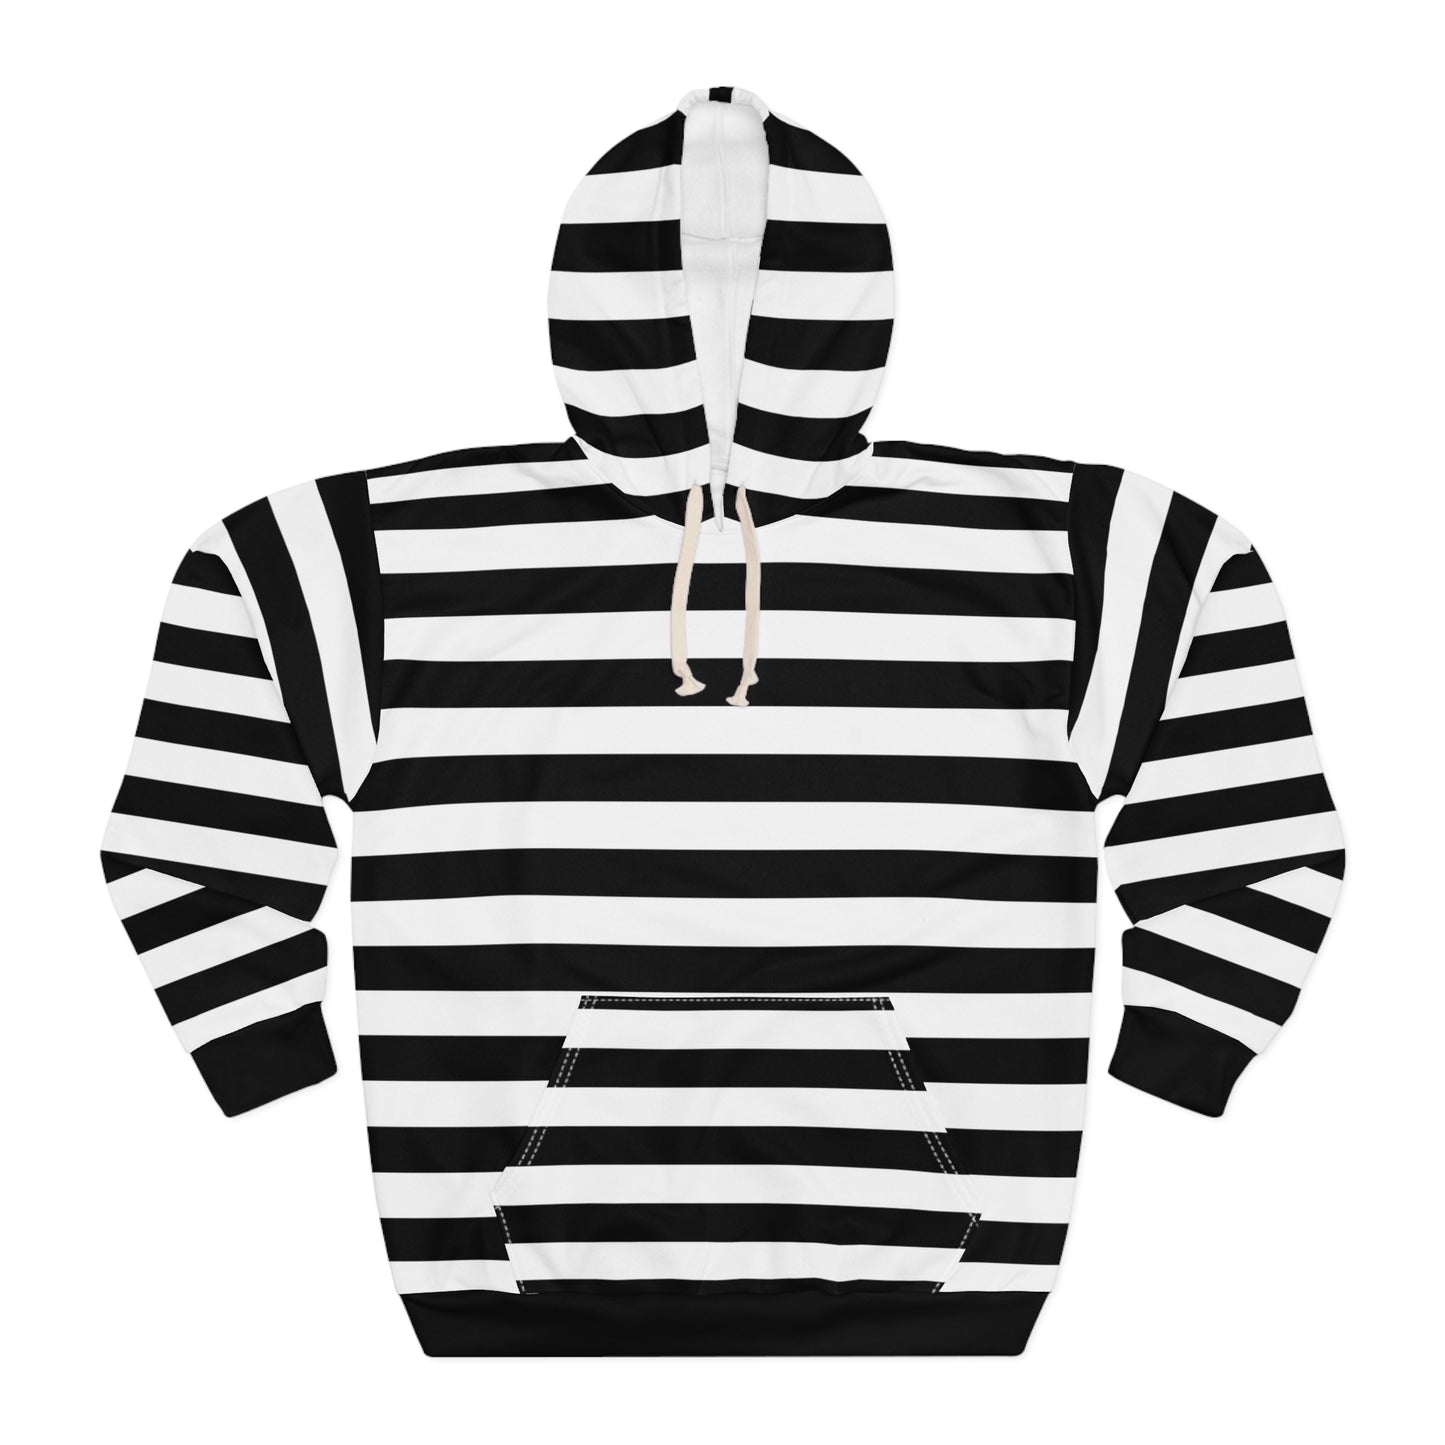 Black White Striped Hoodie, Stripe Pullover Men Women Adult Guys Ladies Aesthetic Graphic Cotton Hooded Sweatshirt with Pockets